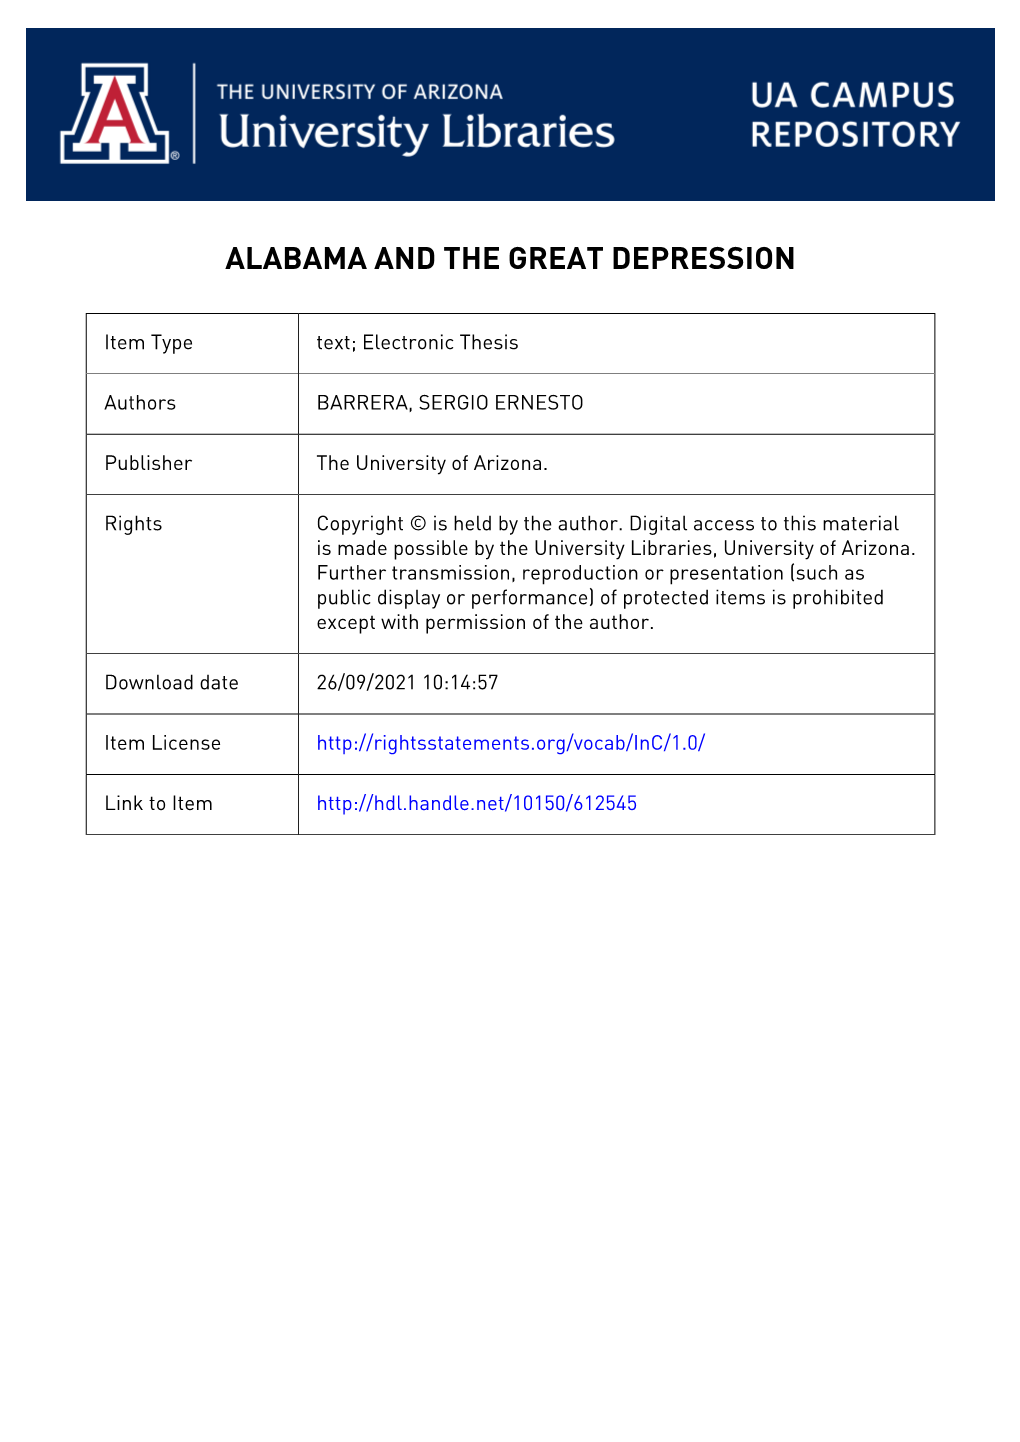 ALABAMA and the GREAT DEPRESSION by SERGIO